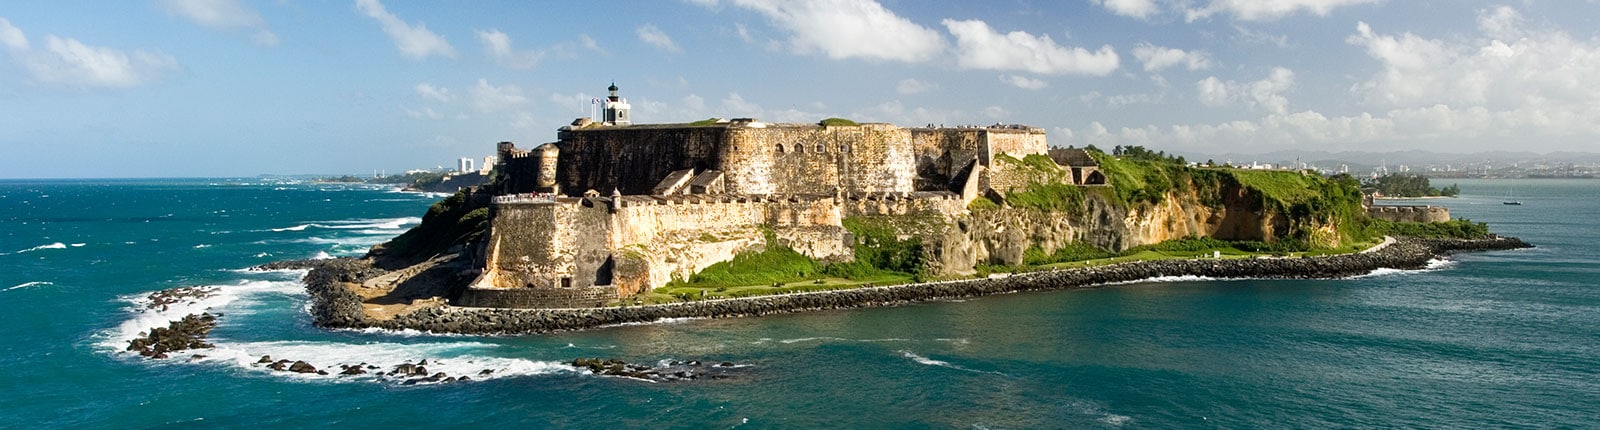 Set back view of the historic fortress on the waters edge in San Juan, Puerto Rico